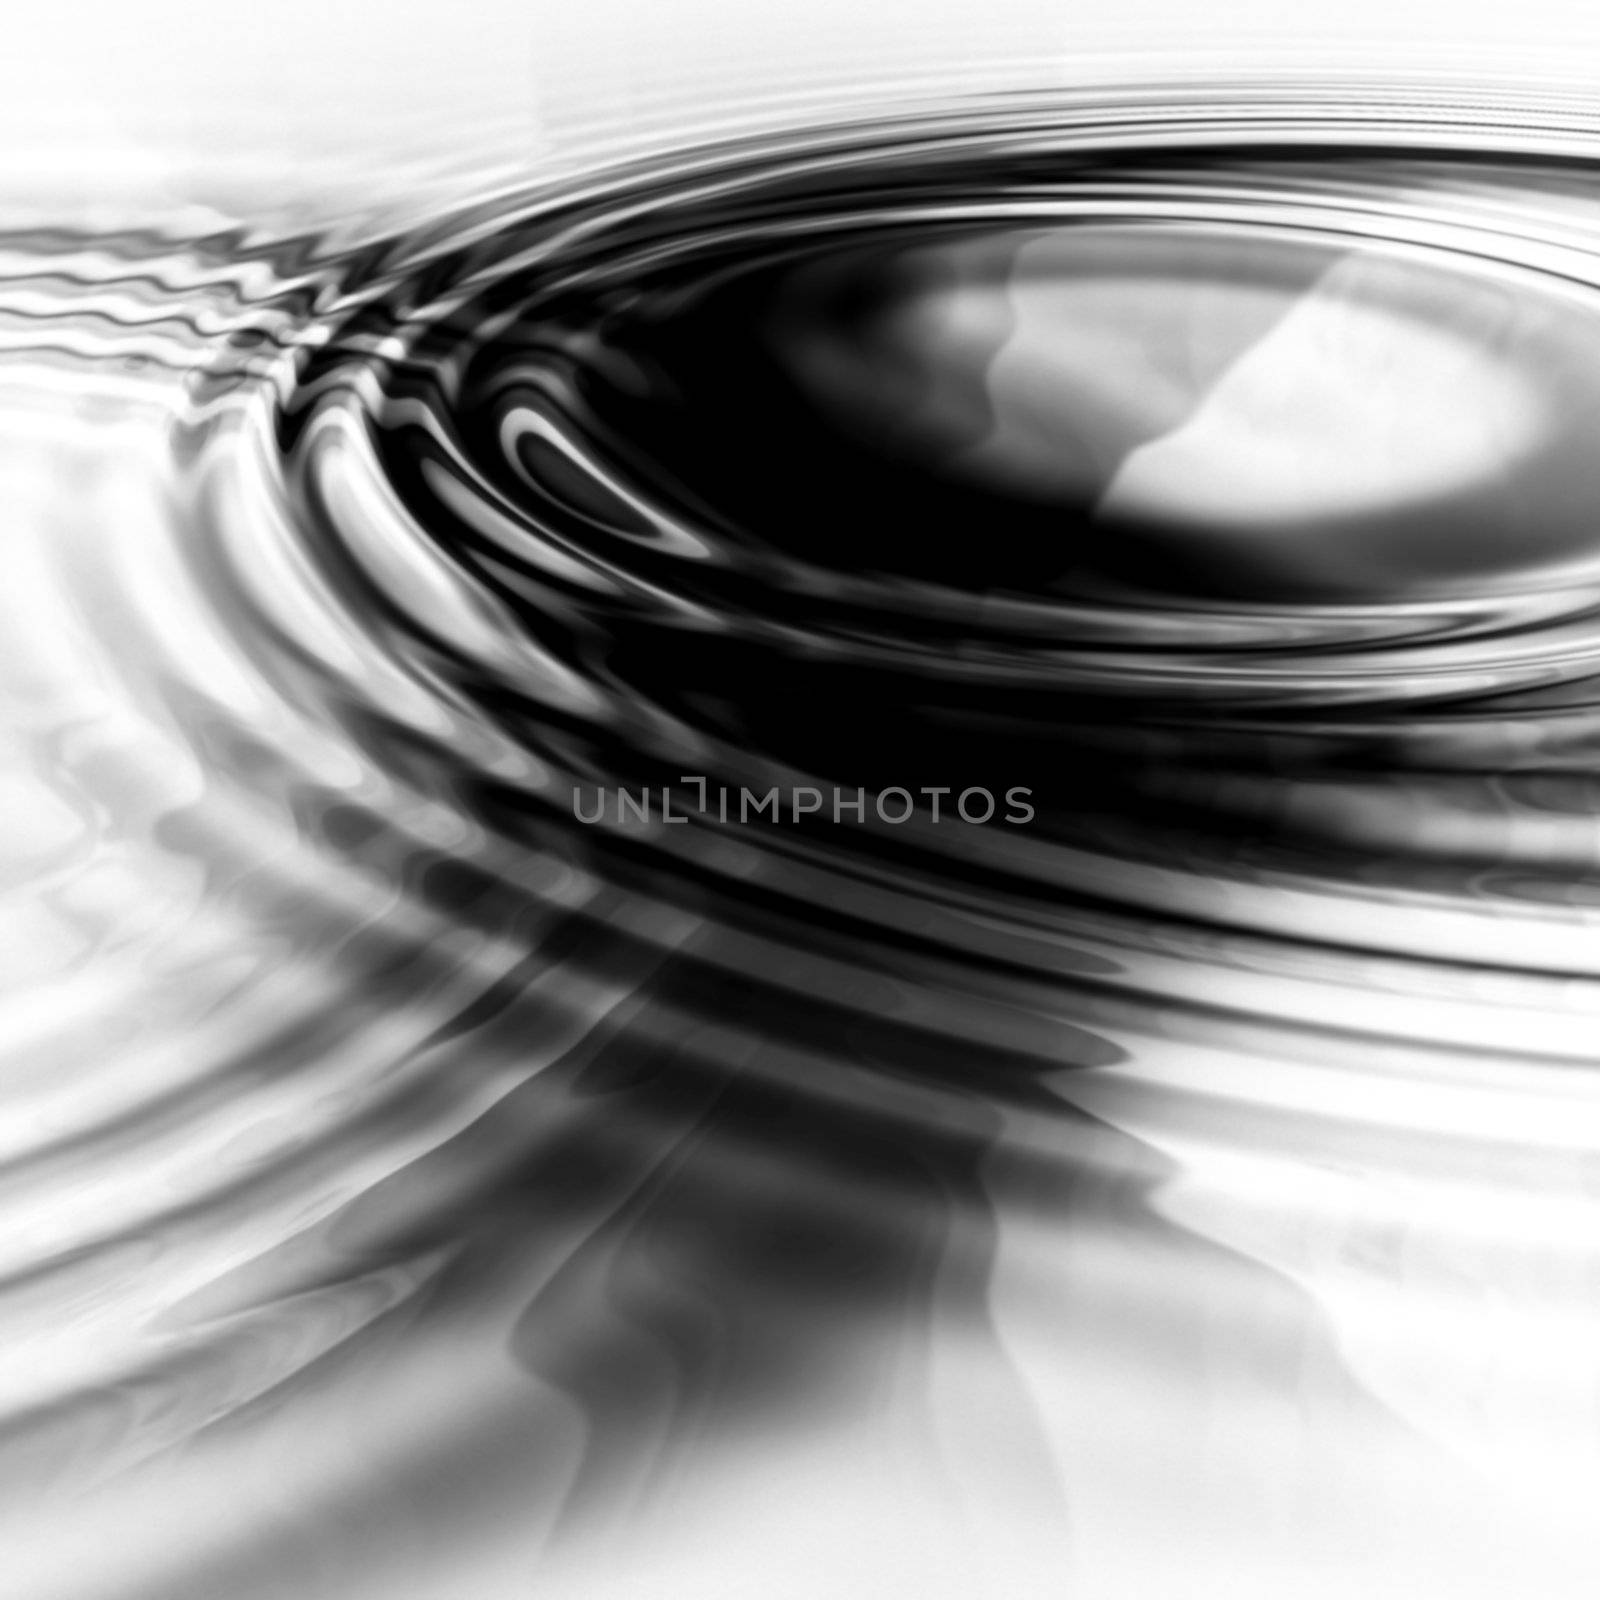 united ripples by graficallyminded